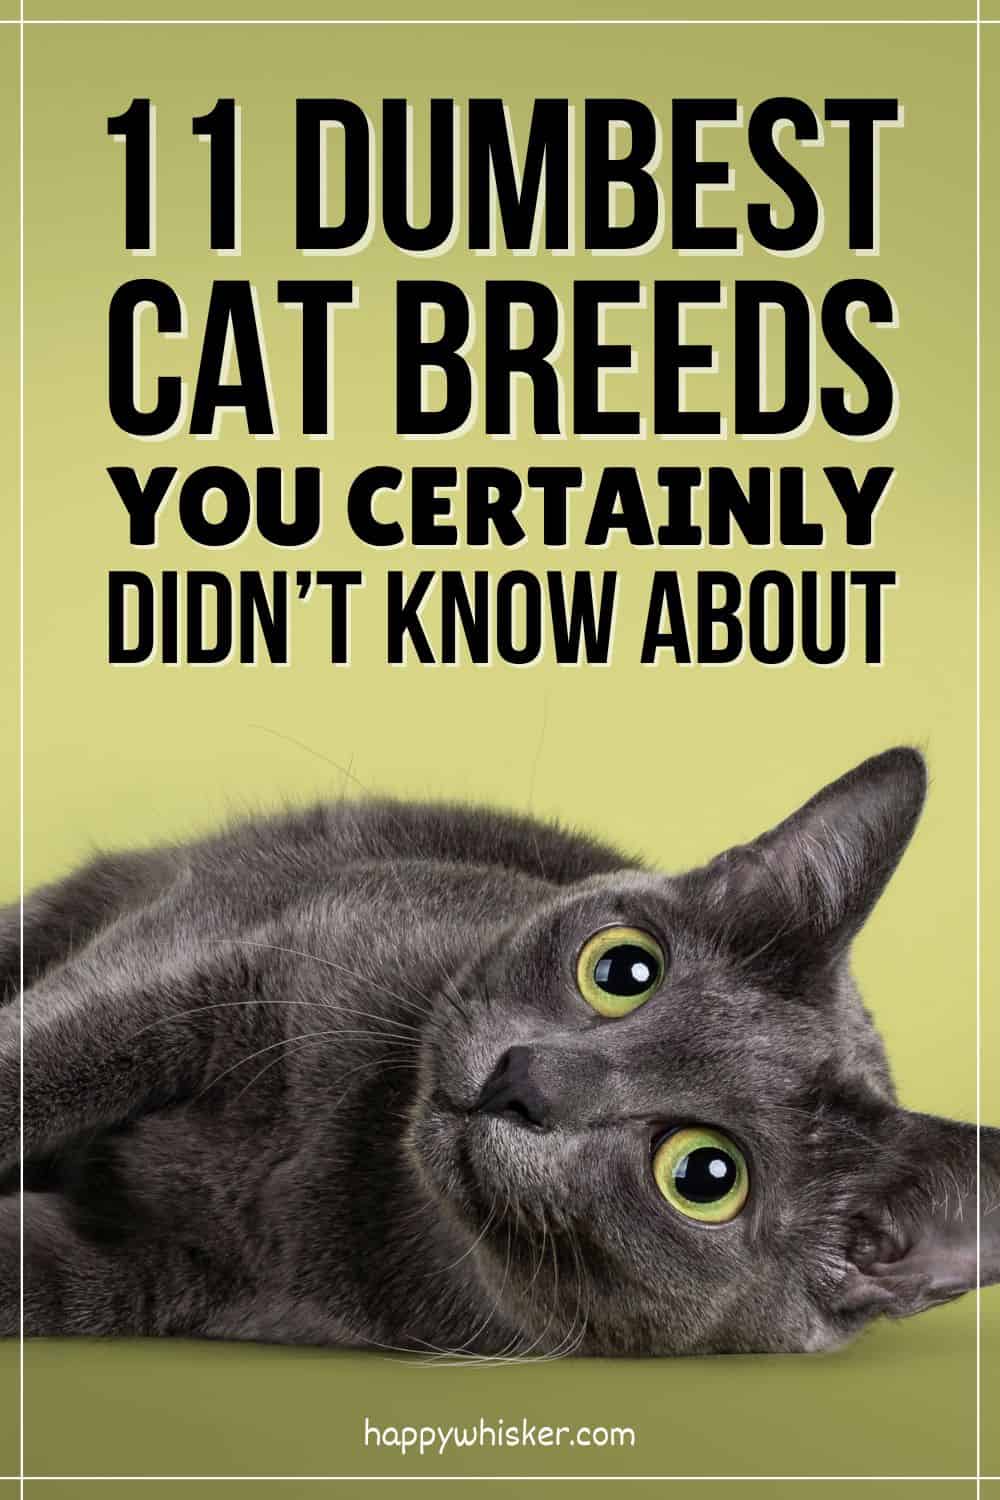 11 Dumbest Cat Breeds You Certainly Didn’t Know About Pinterest